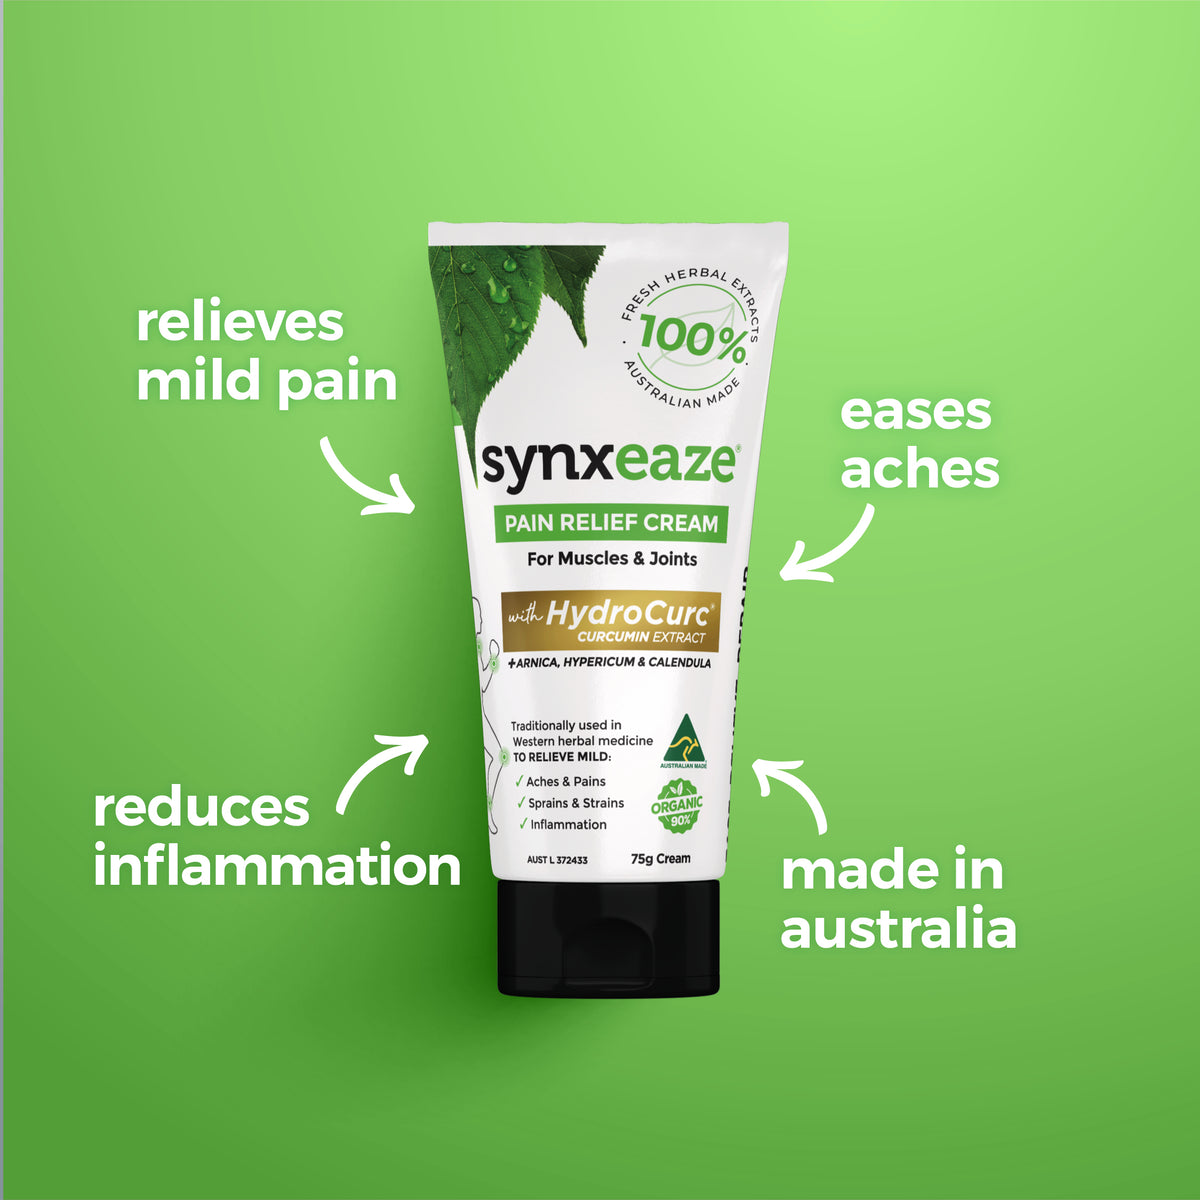 Made in Australia, synxeaze pain relief cream with curcumin tube can be used to relieve mild pain, reduce inflammation, ease aches and pain